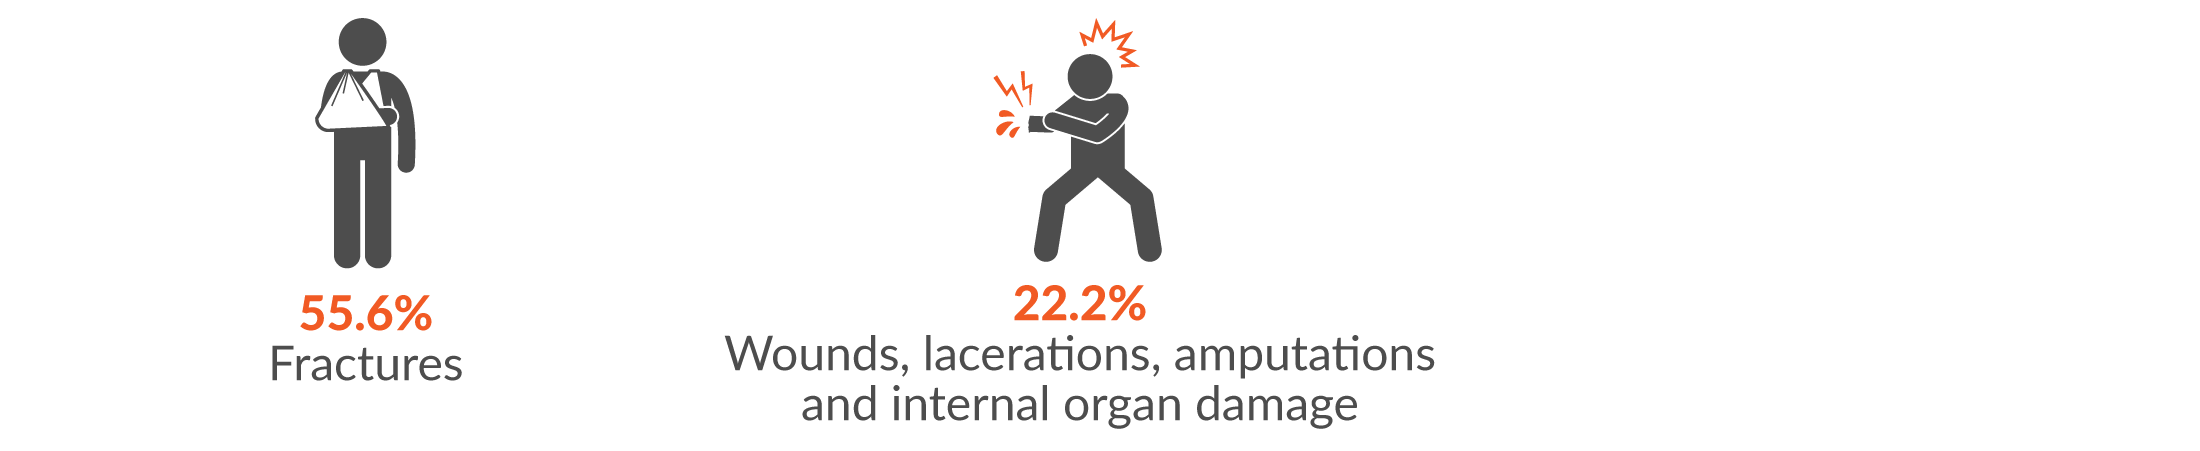 This infographic shows the main two injury groups resulting from being hit by moving objects were 55.6% fractures; and 22.2% wounds, lacerations, amputations and internal organ damage.